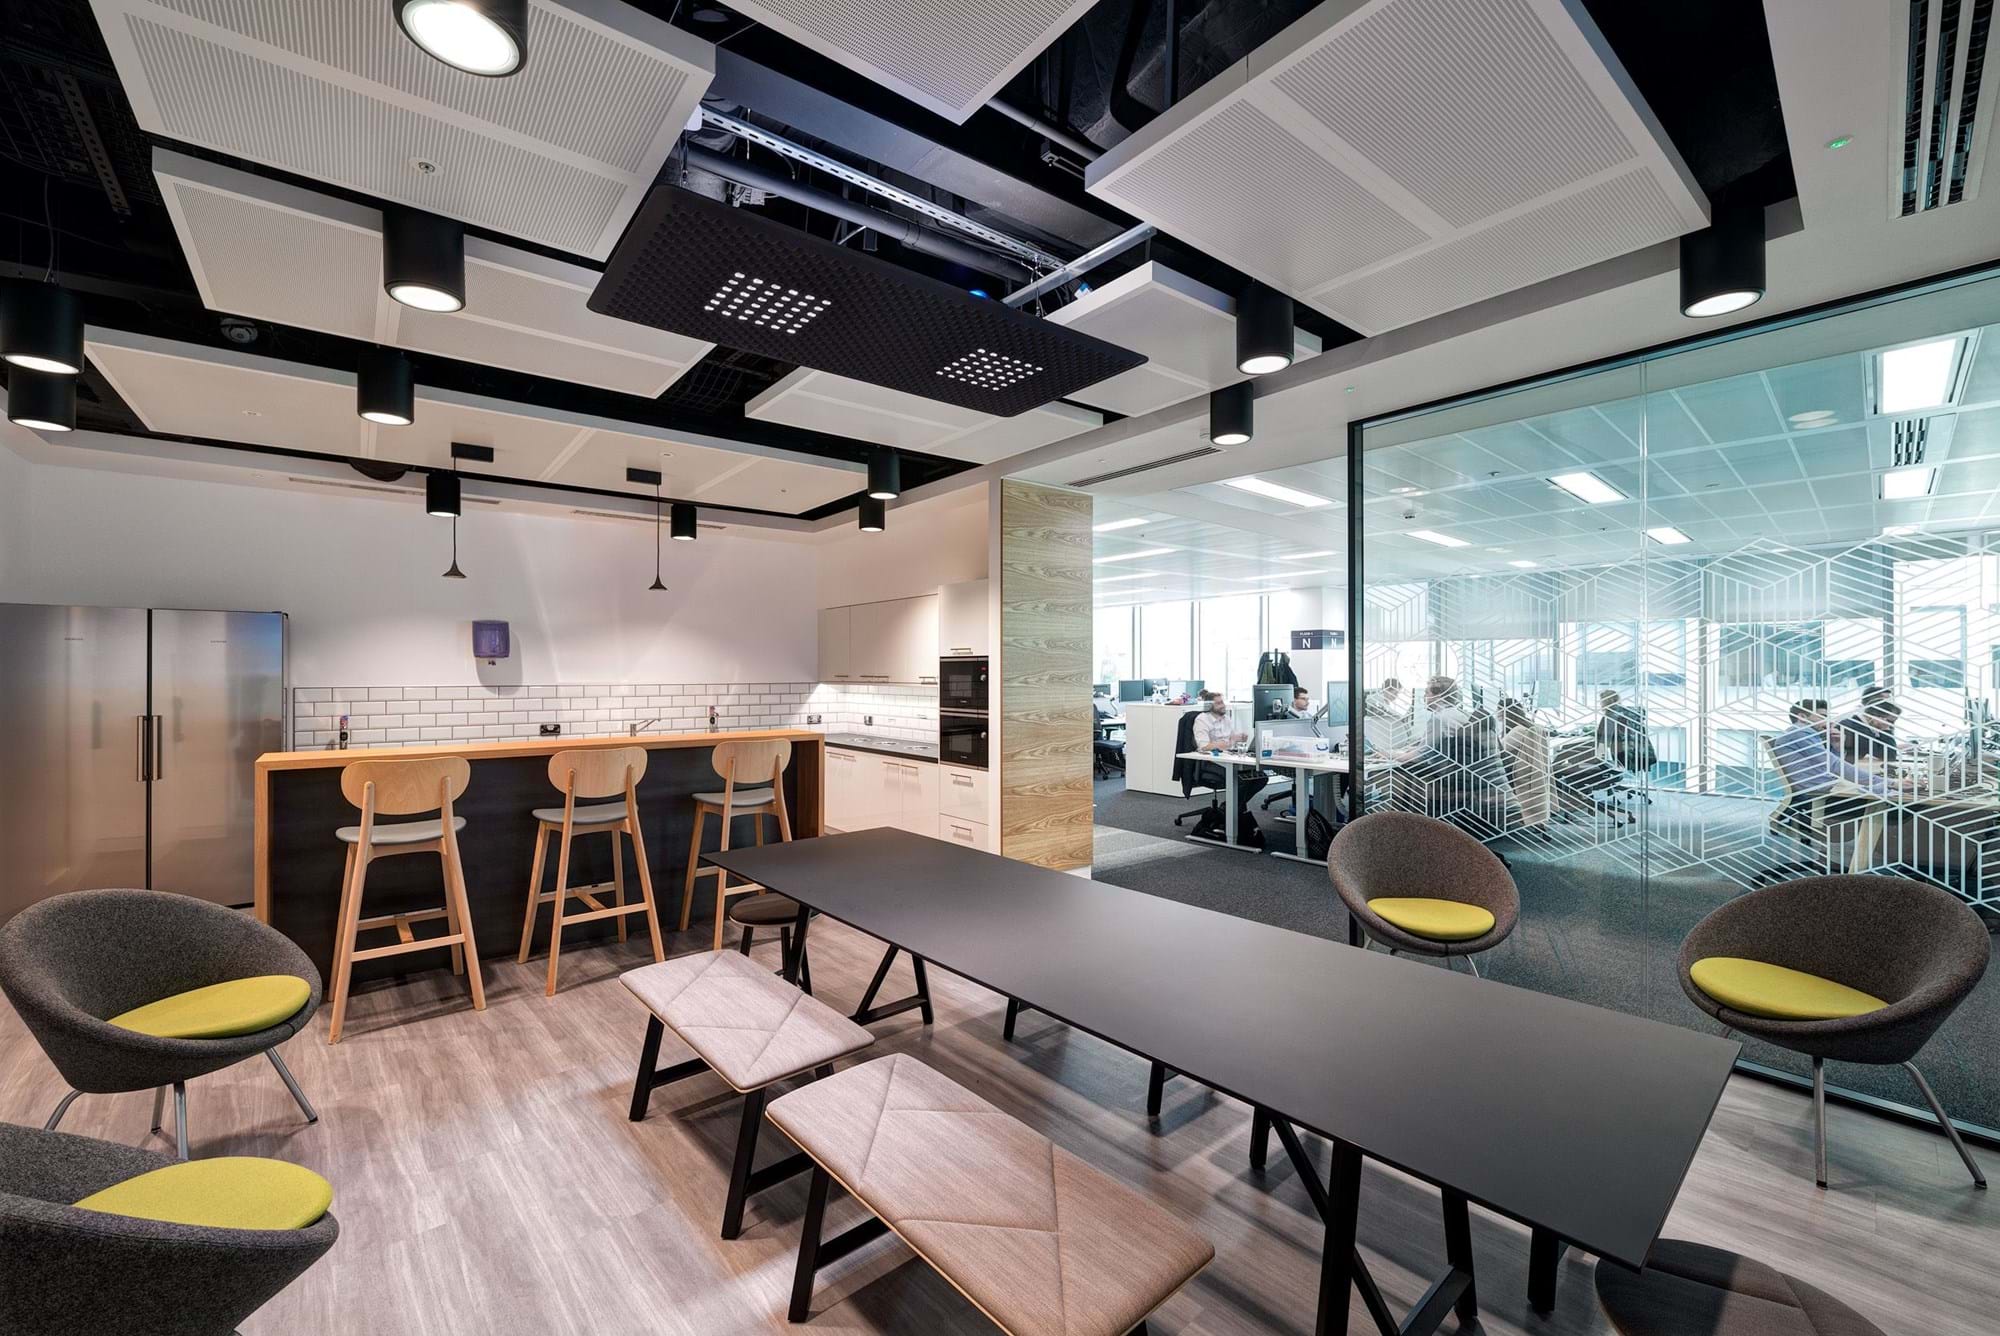 Modus Workspace office design, fit out and refurbishment - Atkins - Victoria, London - Atkins 08 highres sRGB.jpg